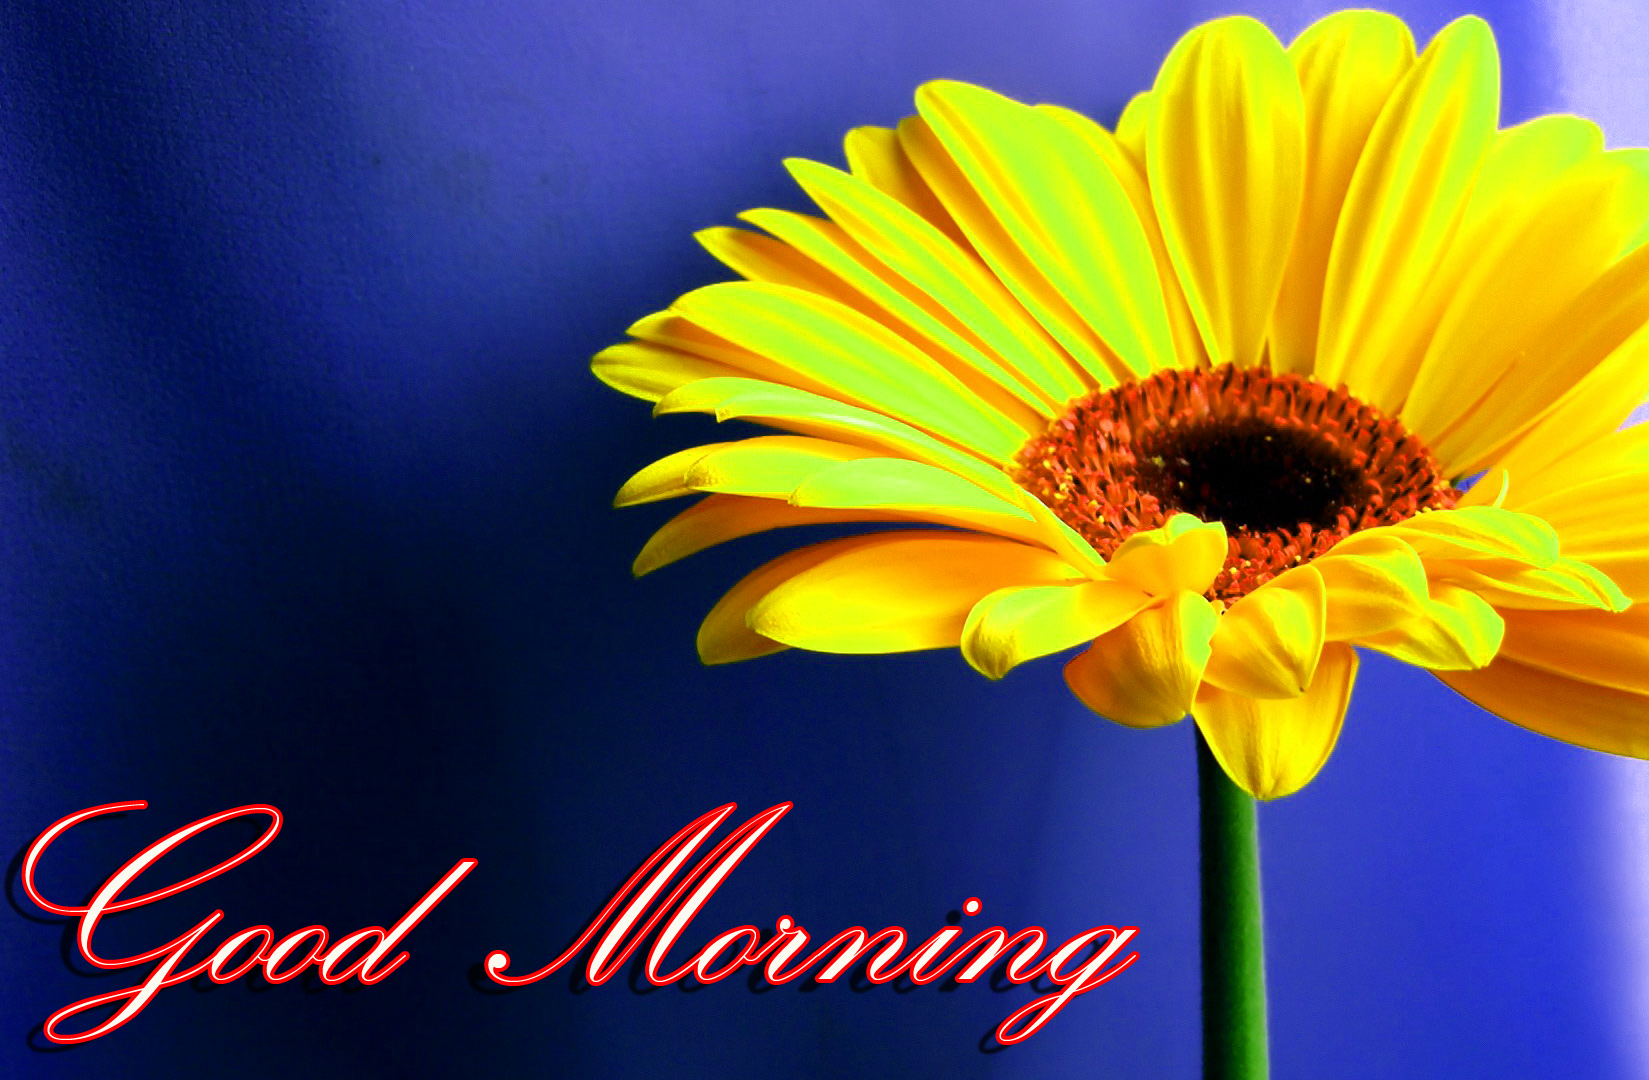 Latest Good Morning Images Wallpaper Photo Pics HD Download For